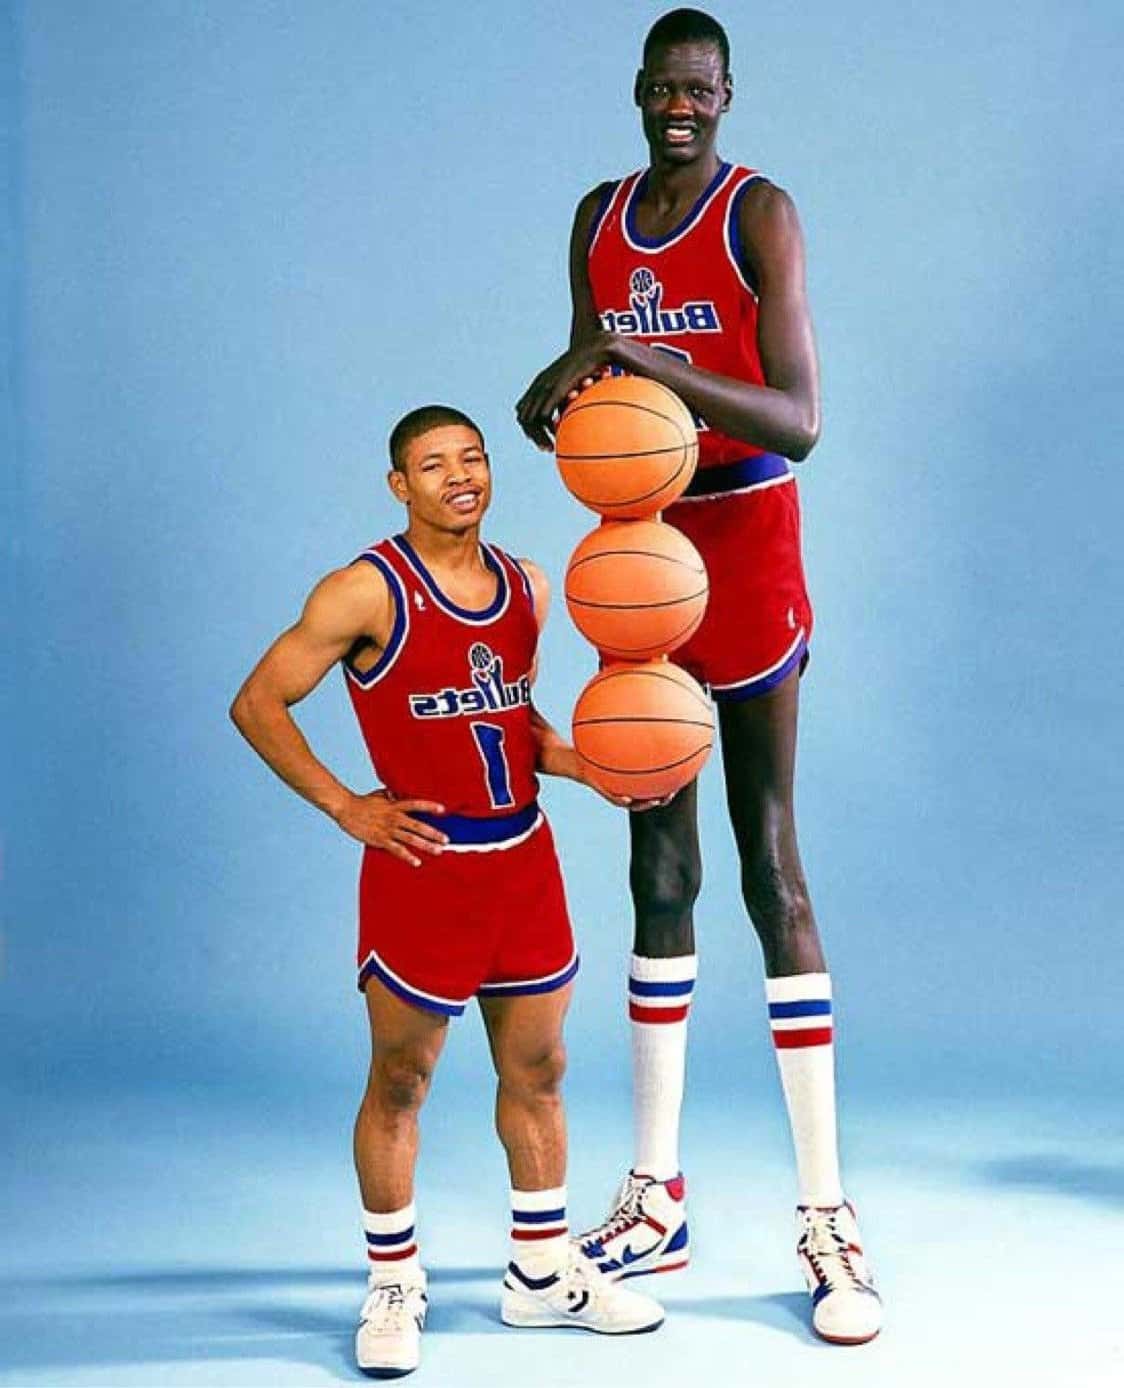 44 Top Images Shortest Nba Player Ever Who Is Currently the Shortest